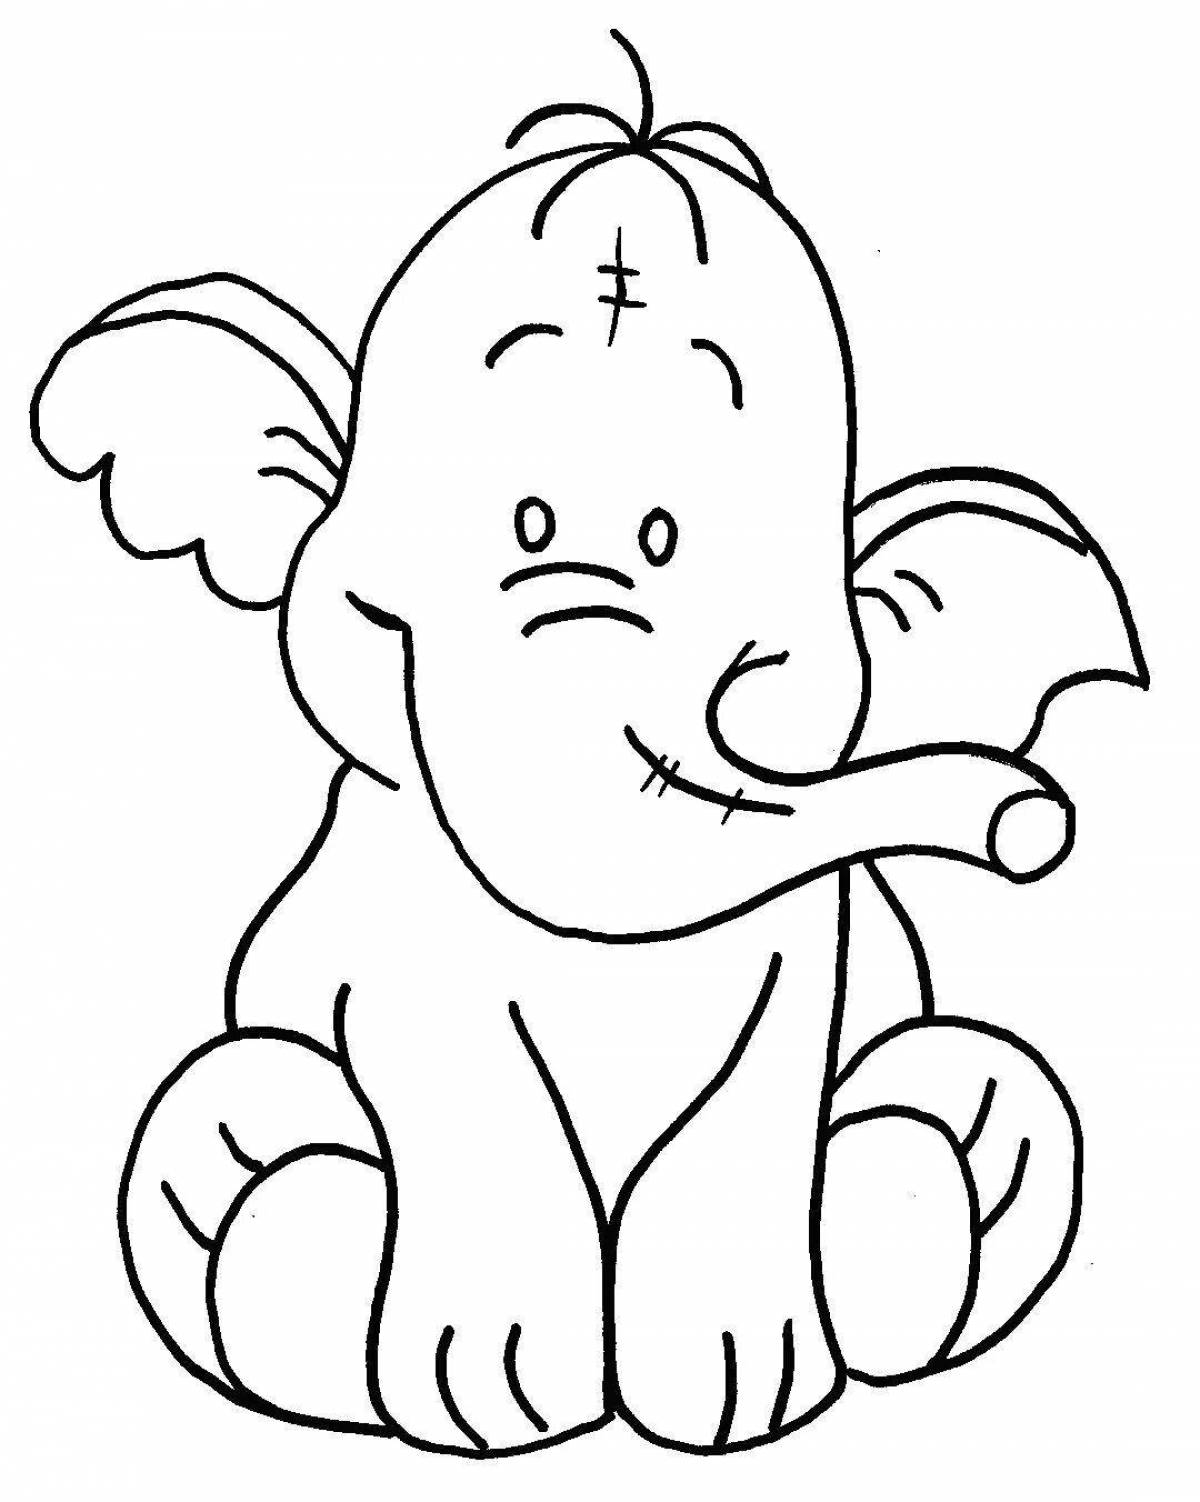 Coloring page admiring baby elephant